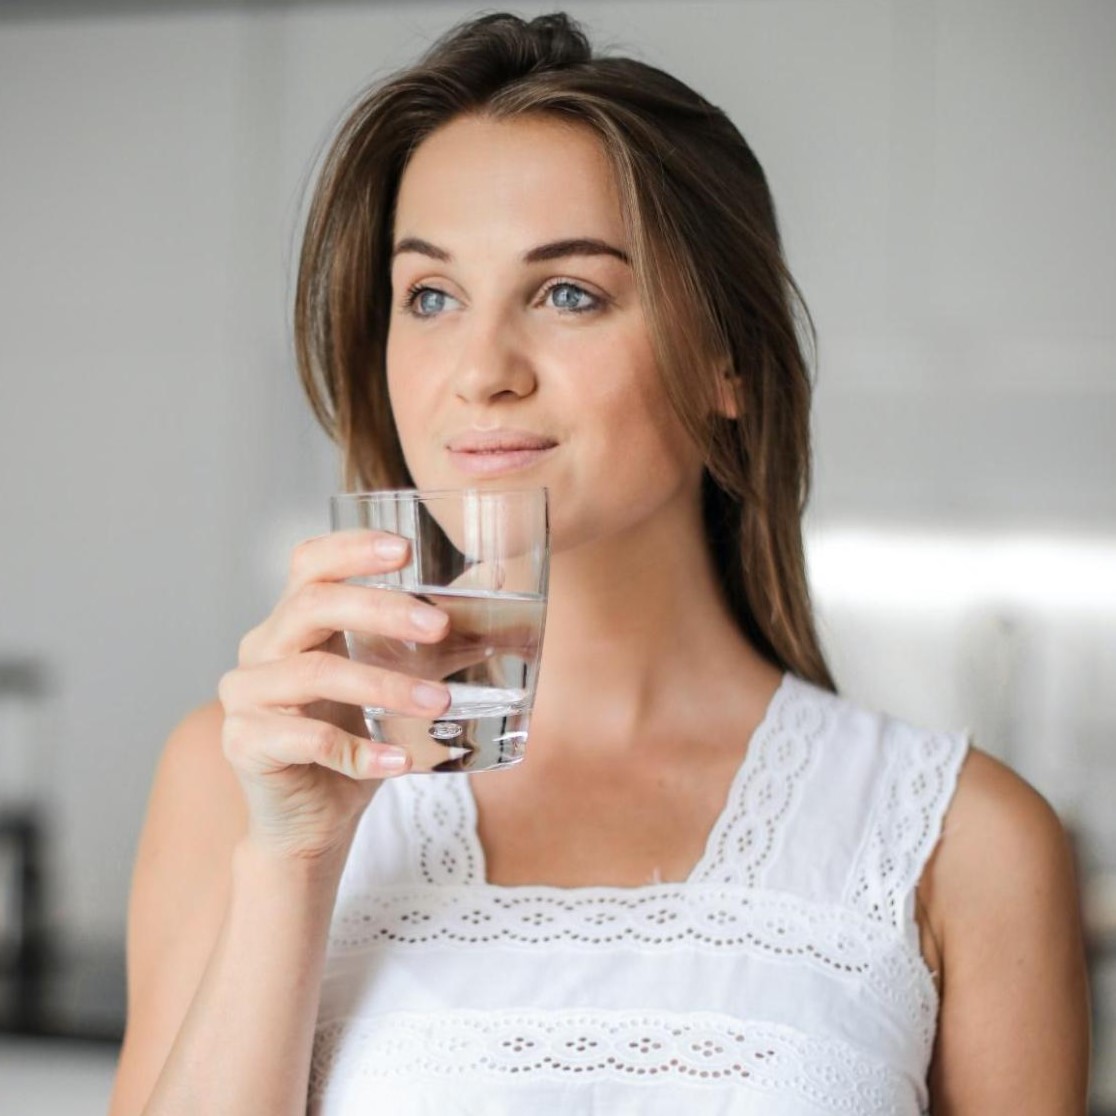 Drinking plenty of water to aid in hair health